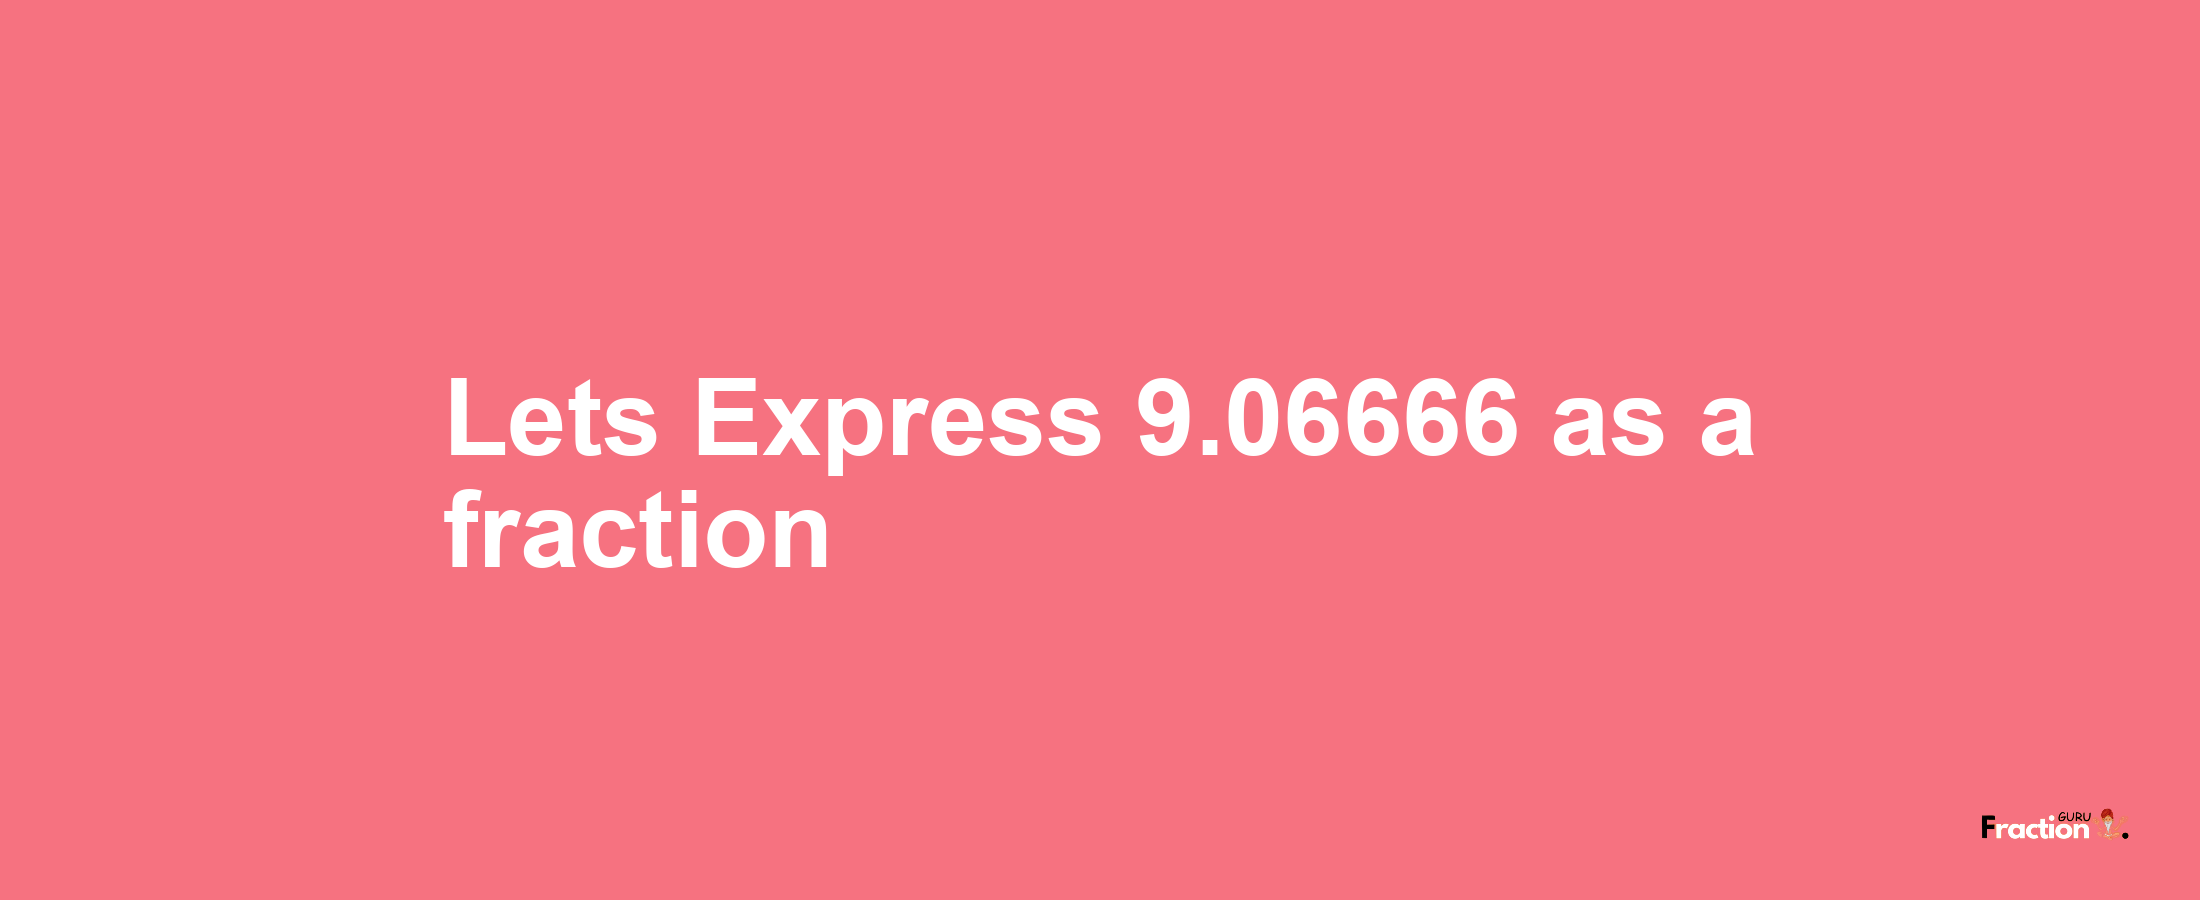 Lets Express 9.06666 as afraction